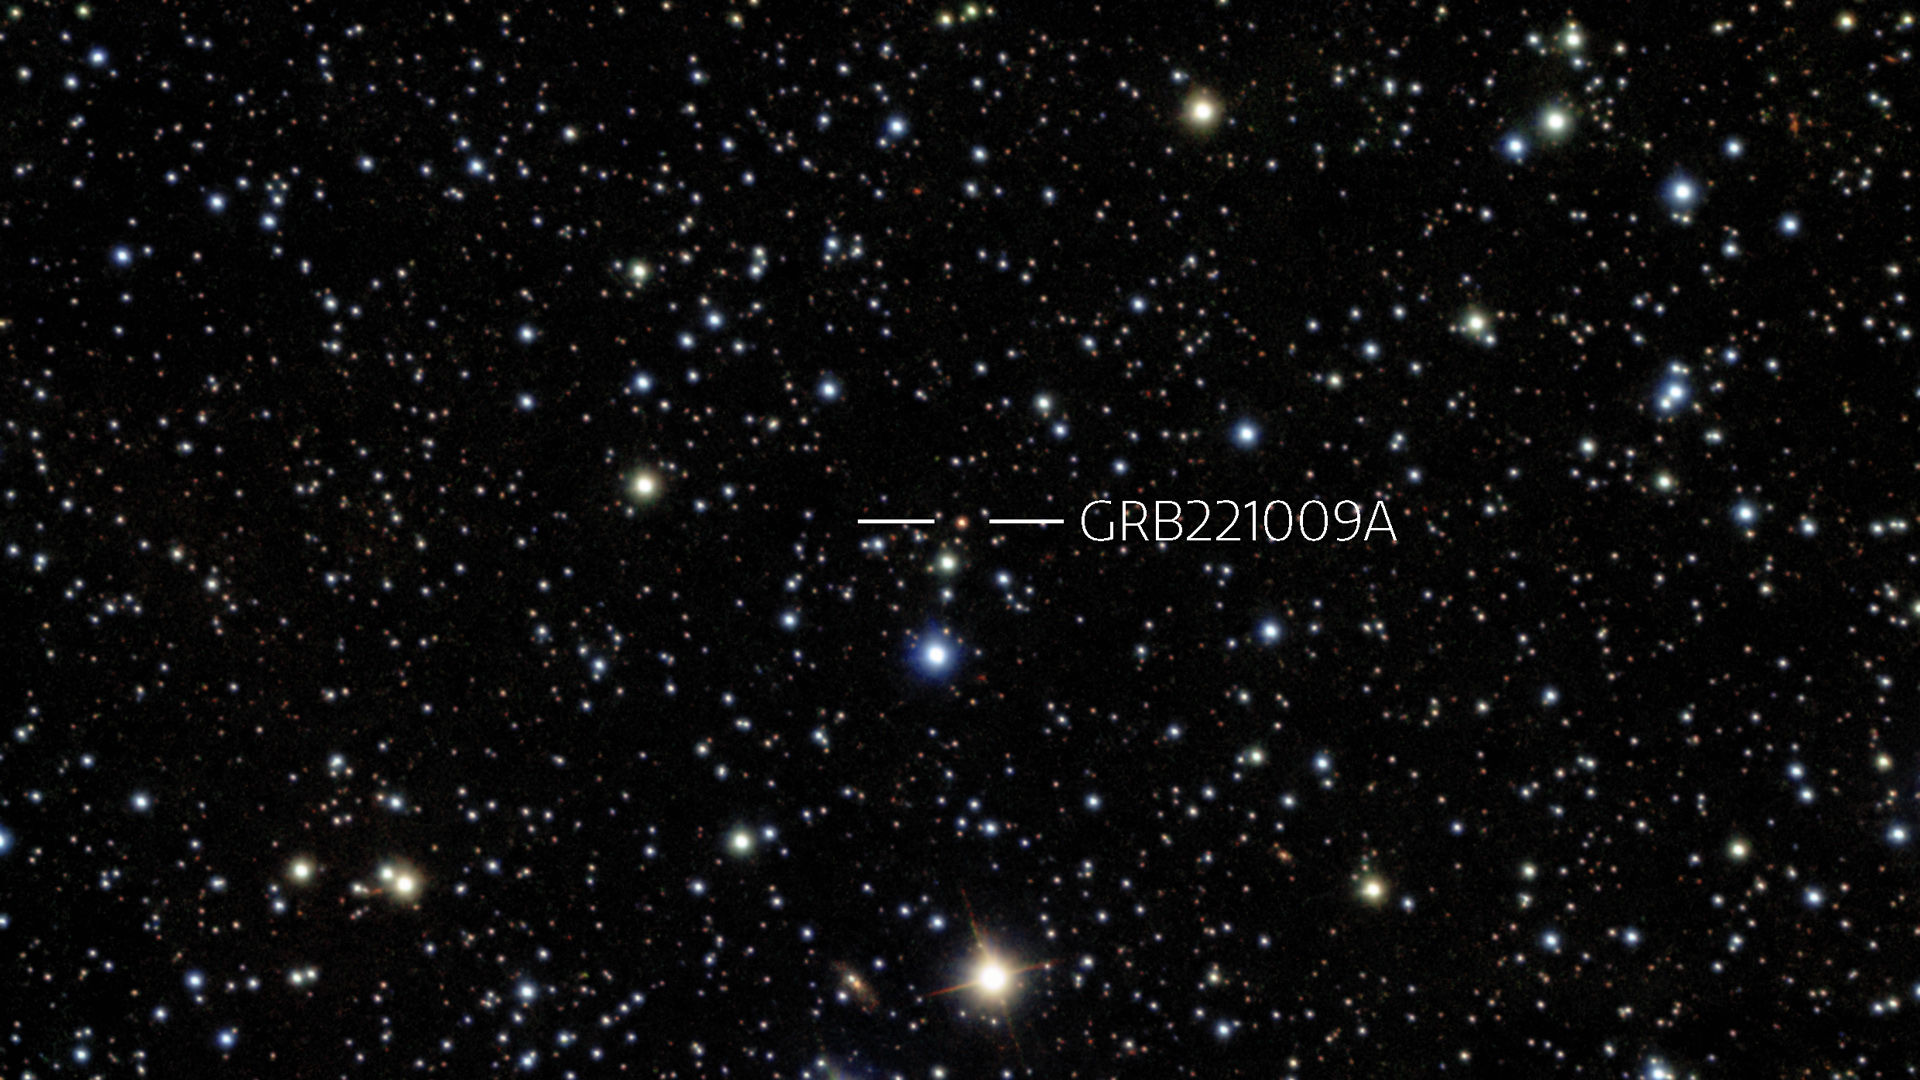 The record-breaking GRB221009A gamma ray burst seen by the Gemini South telescope in Chile.